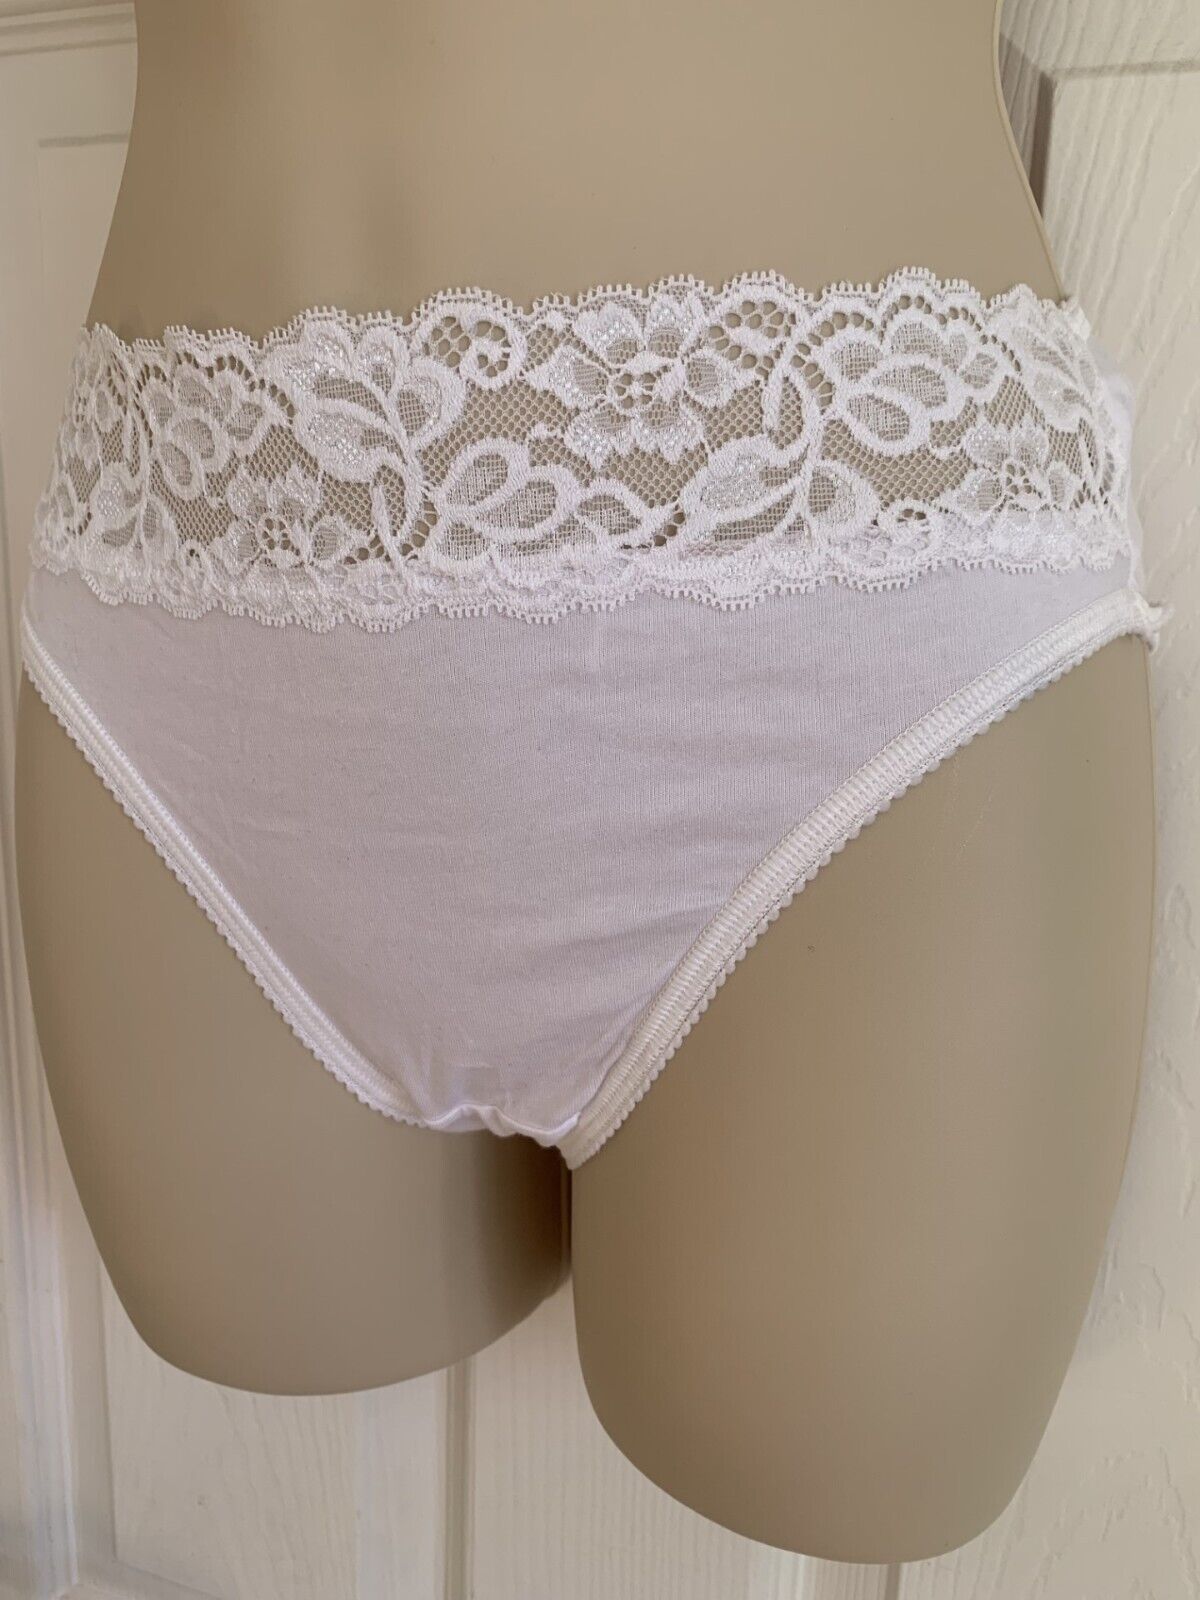 EX M*S White Cotton Rich Embroidery Lace Trim High Leg Knickers Size 10-22